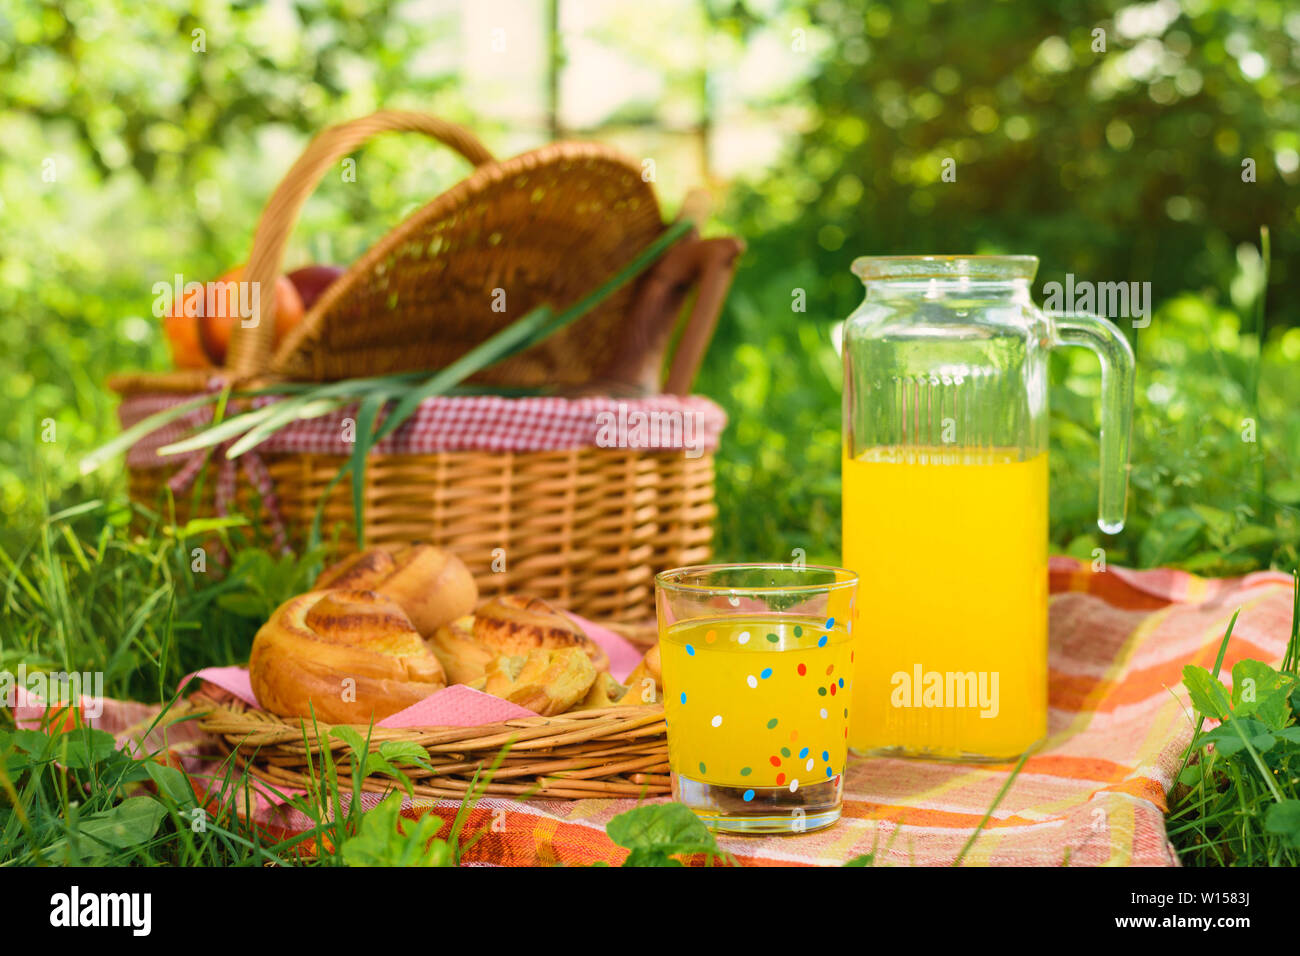 Picnic in nature. Picnic basket with fruit decanter juice and buns Stock Photo